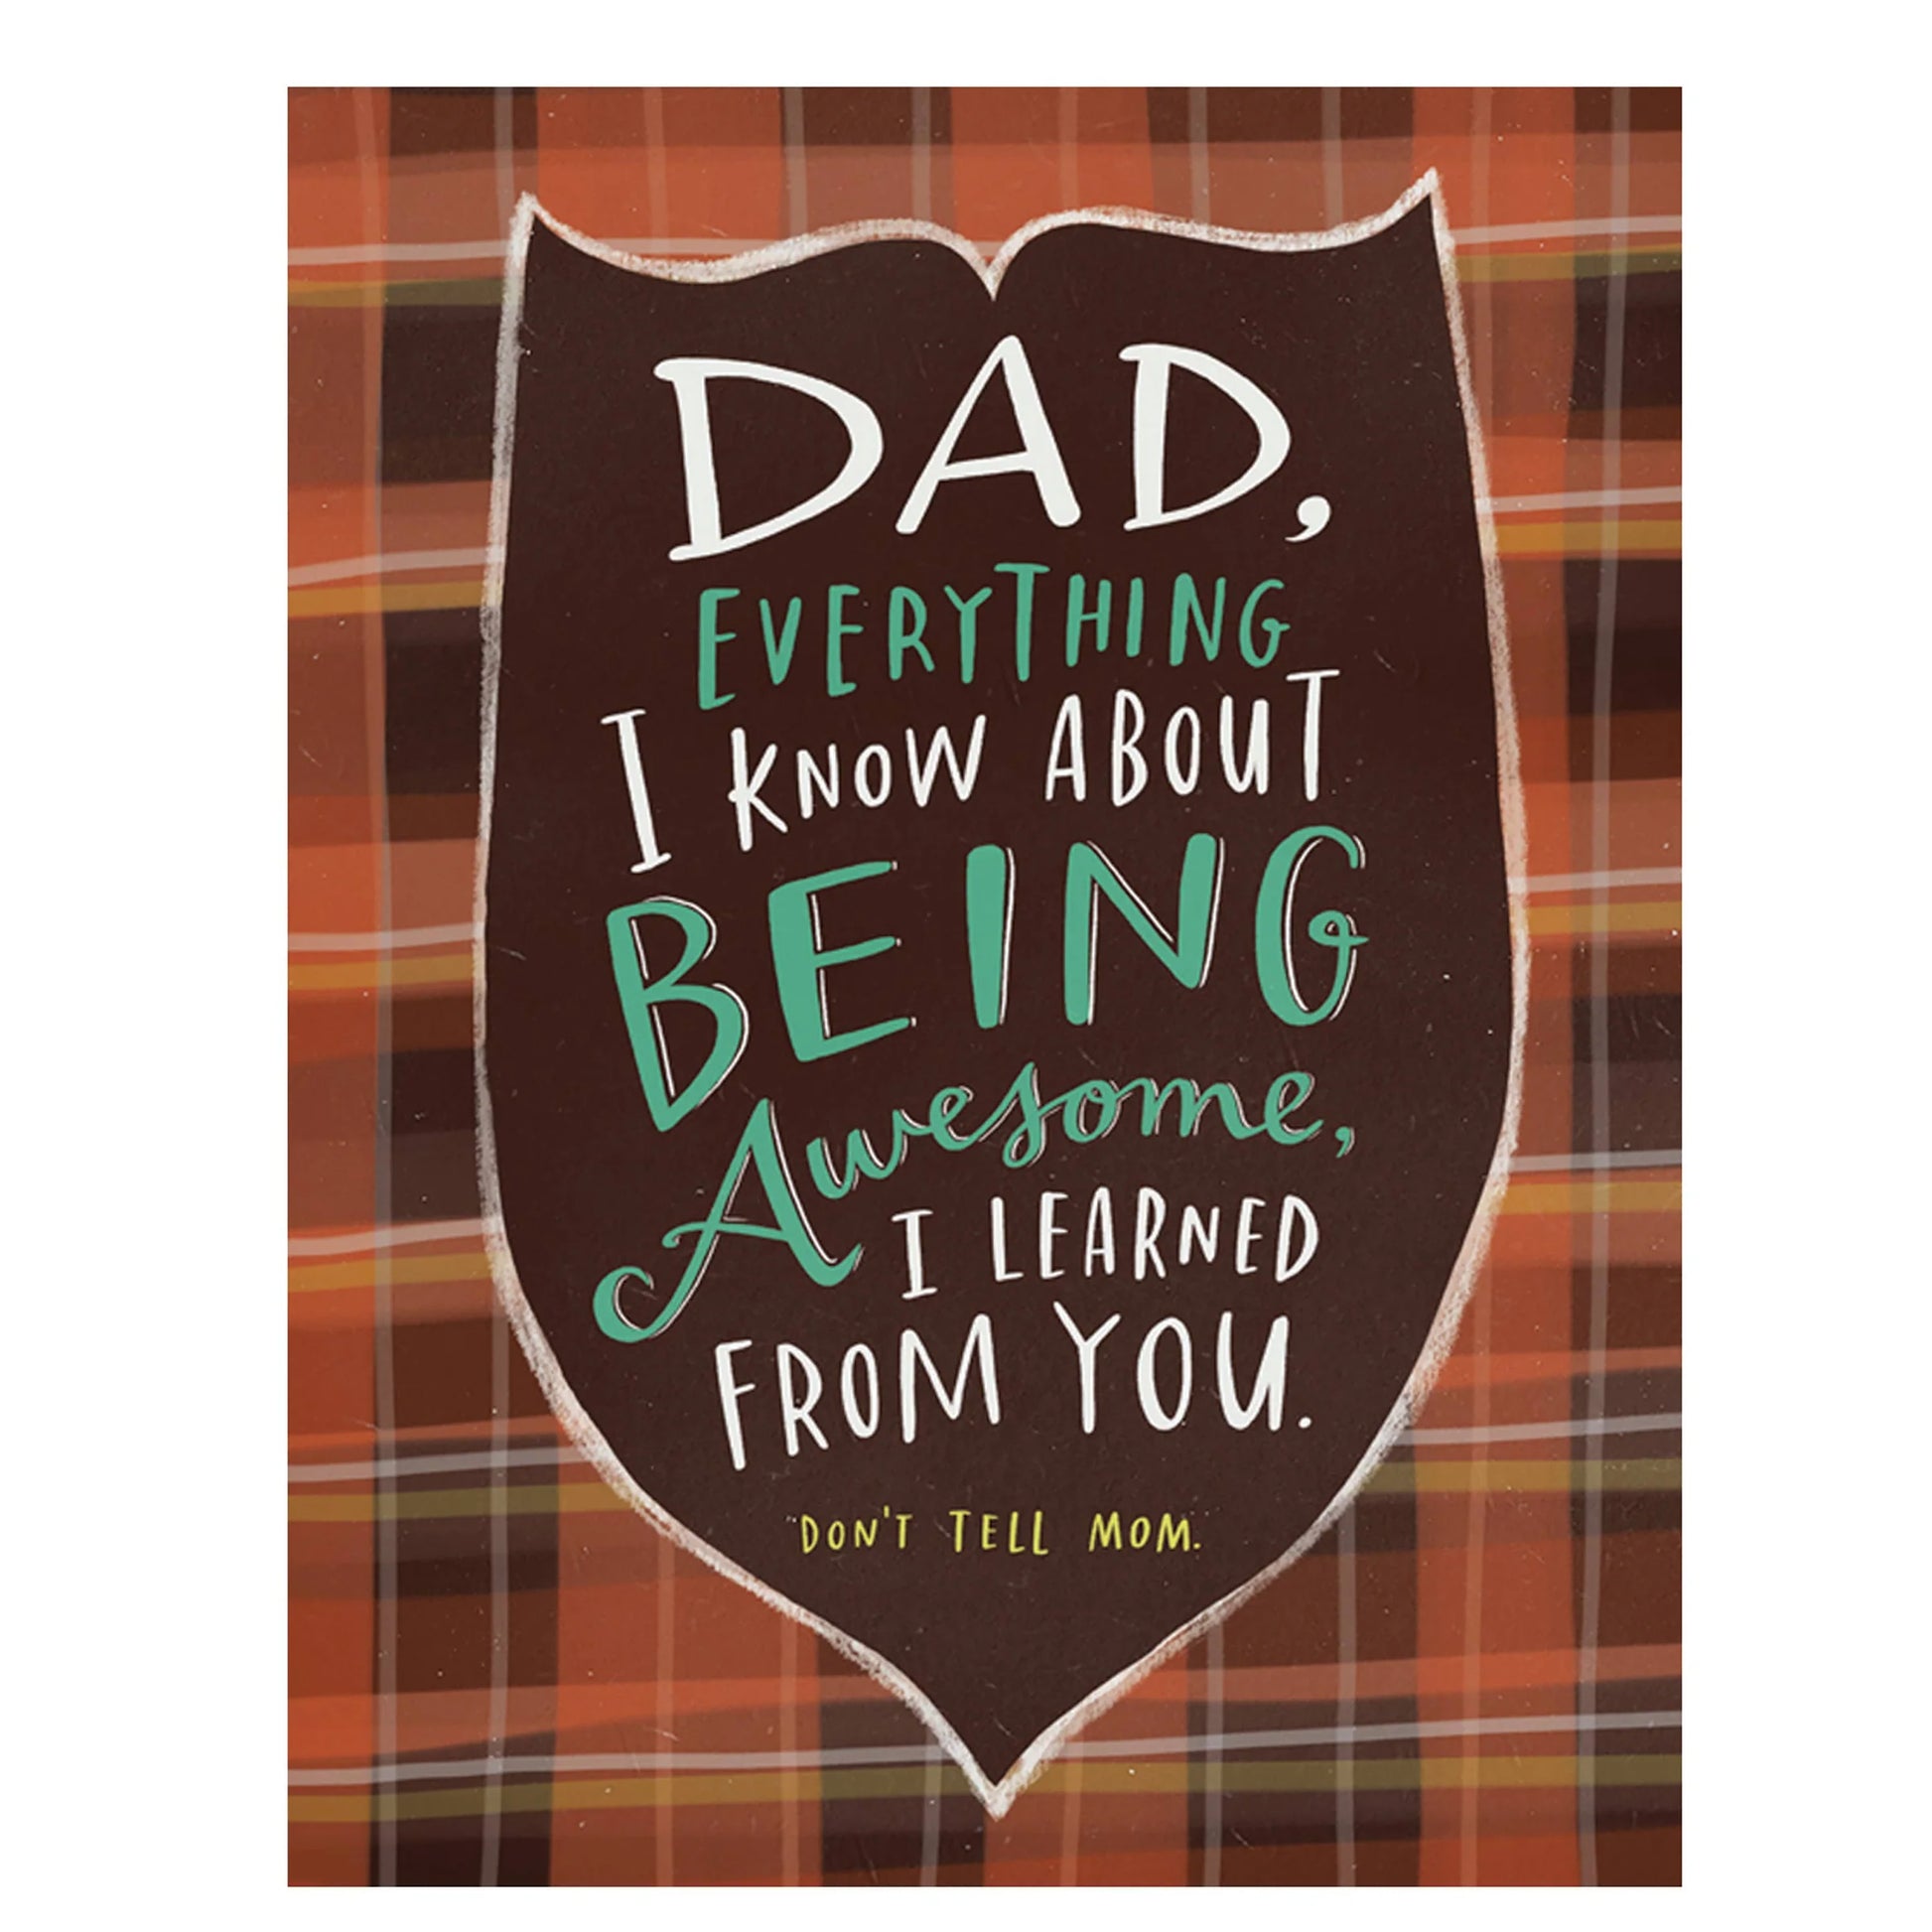 Dad Everything I Know About Being Awesome I Learned From You Don't Tell Mom Greeting Card